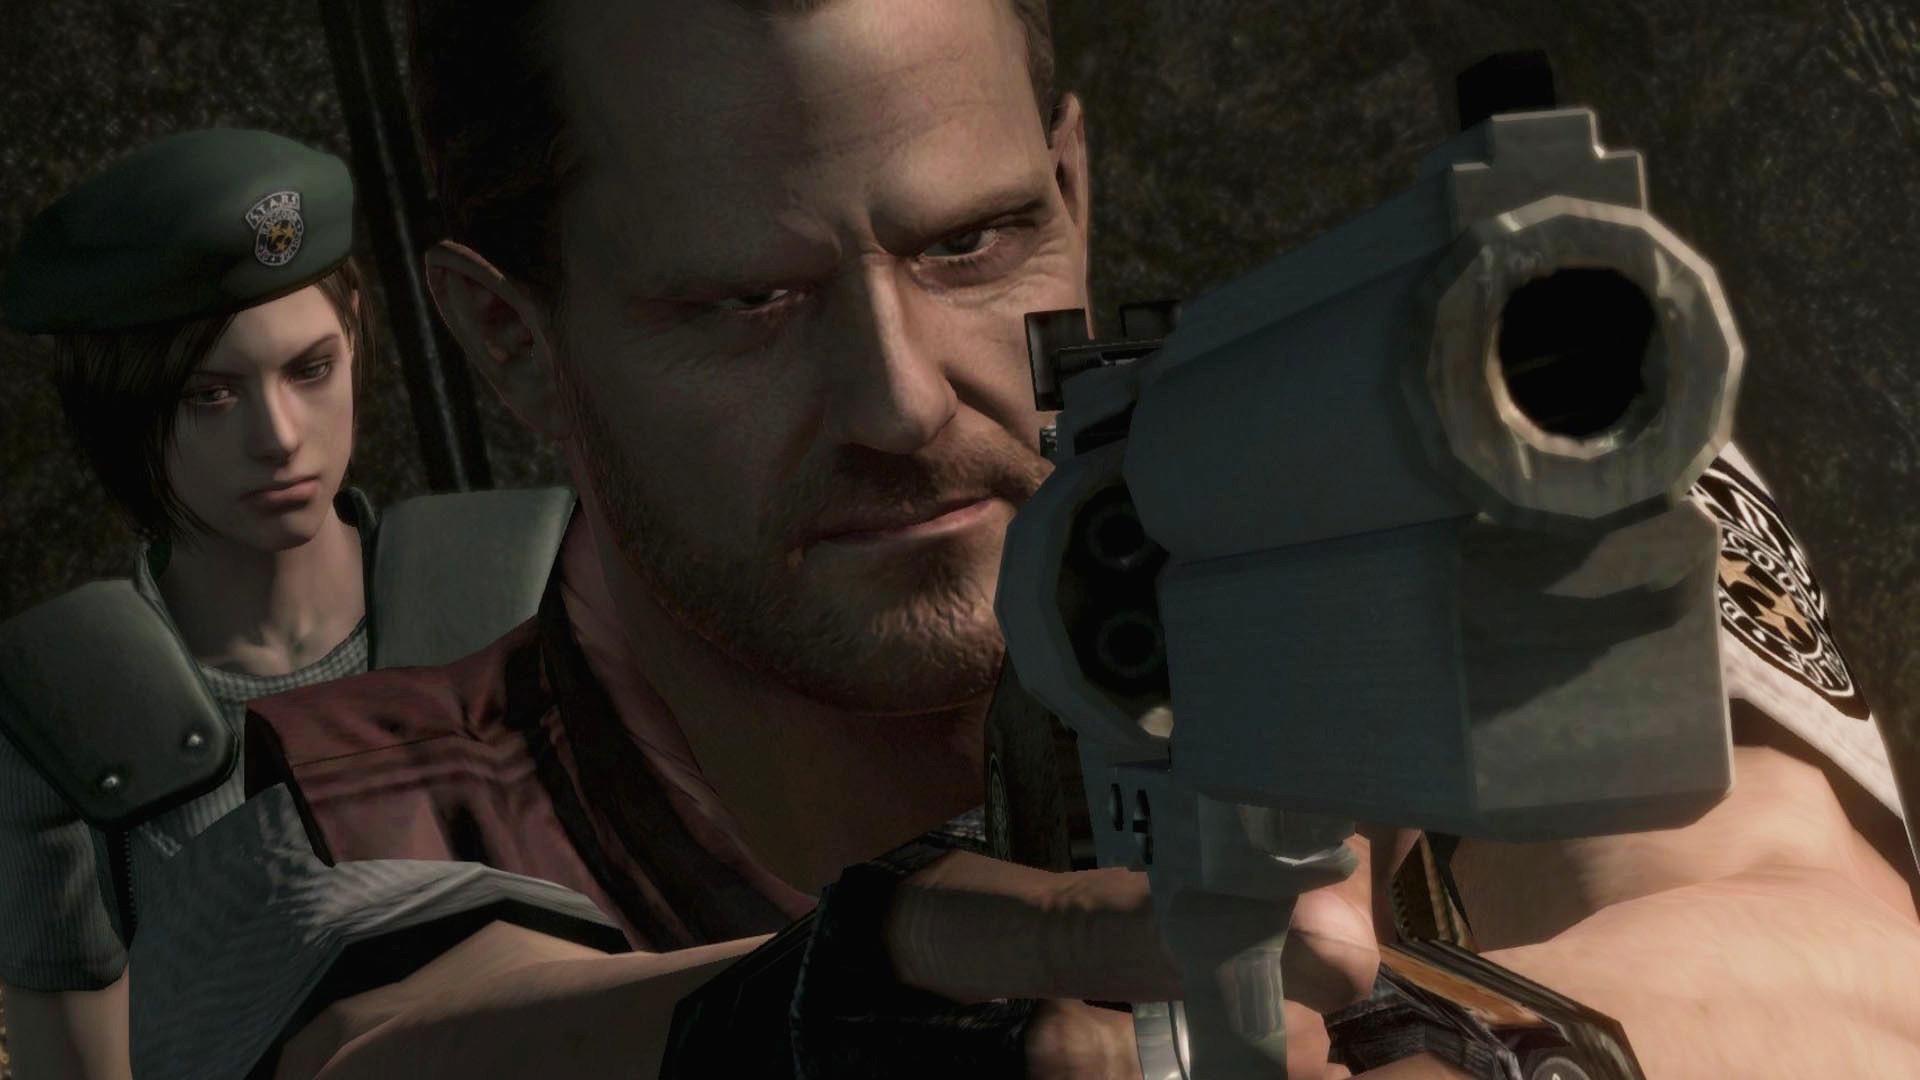 Save 75% on Resident Evil 5 Gold Edition on Steam